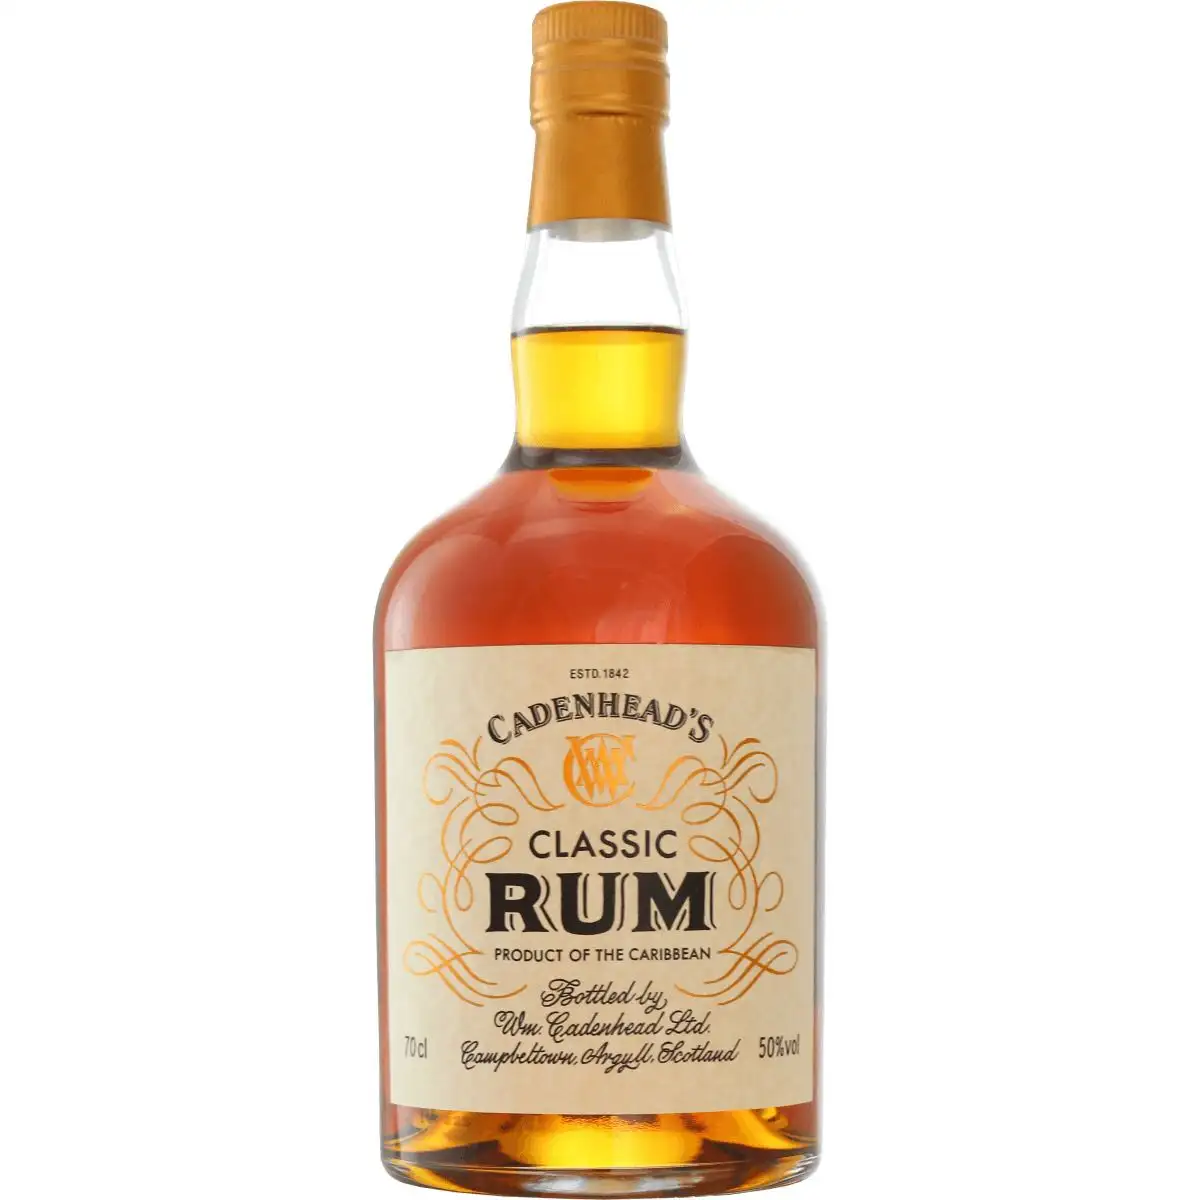 Image of the front of the bottle of the rum Classic Rum